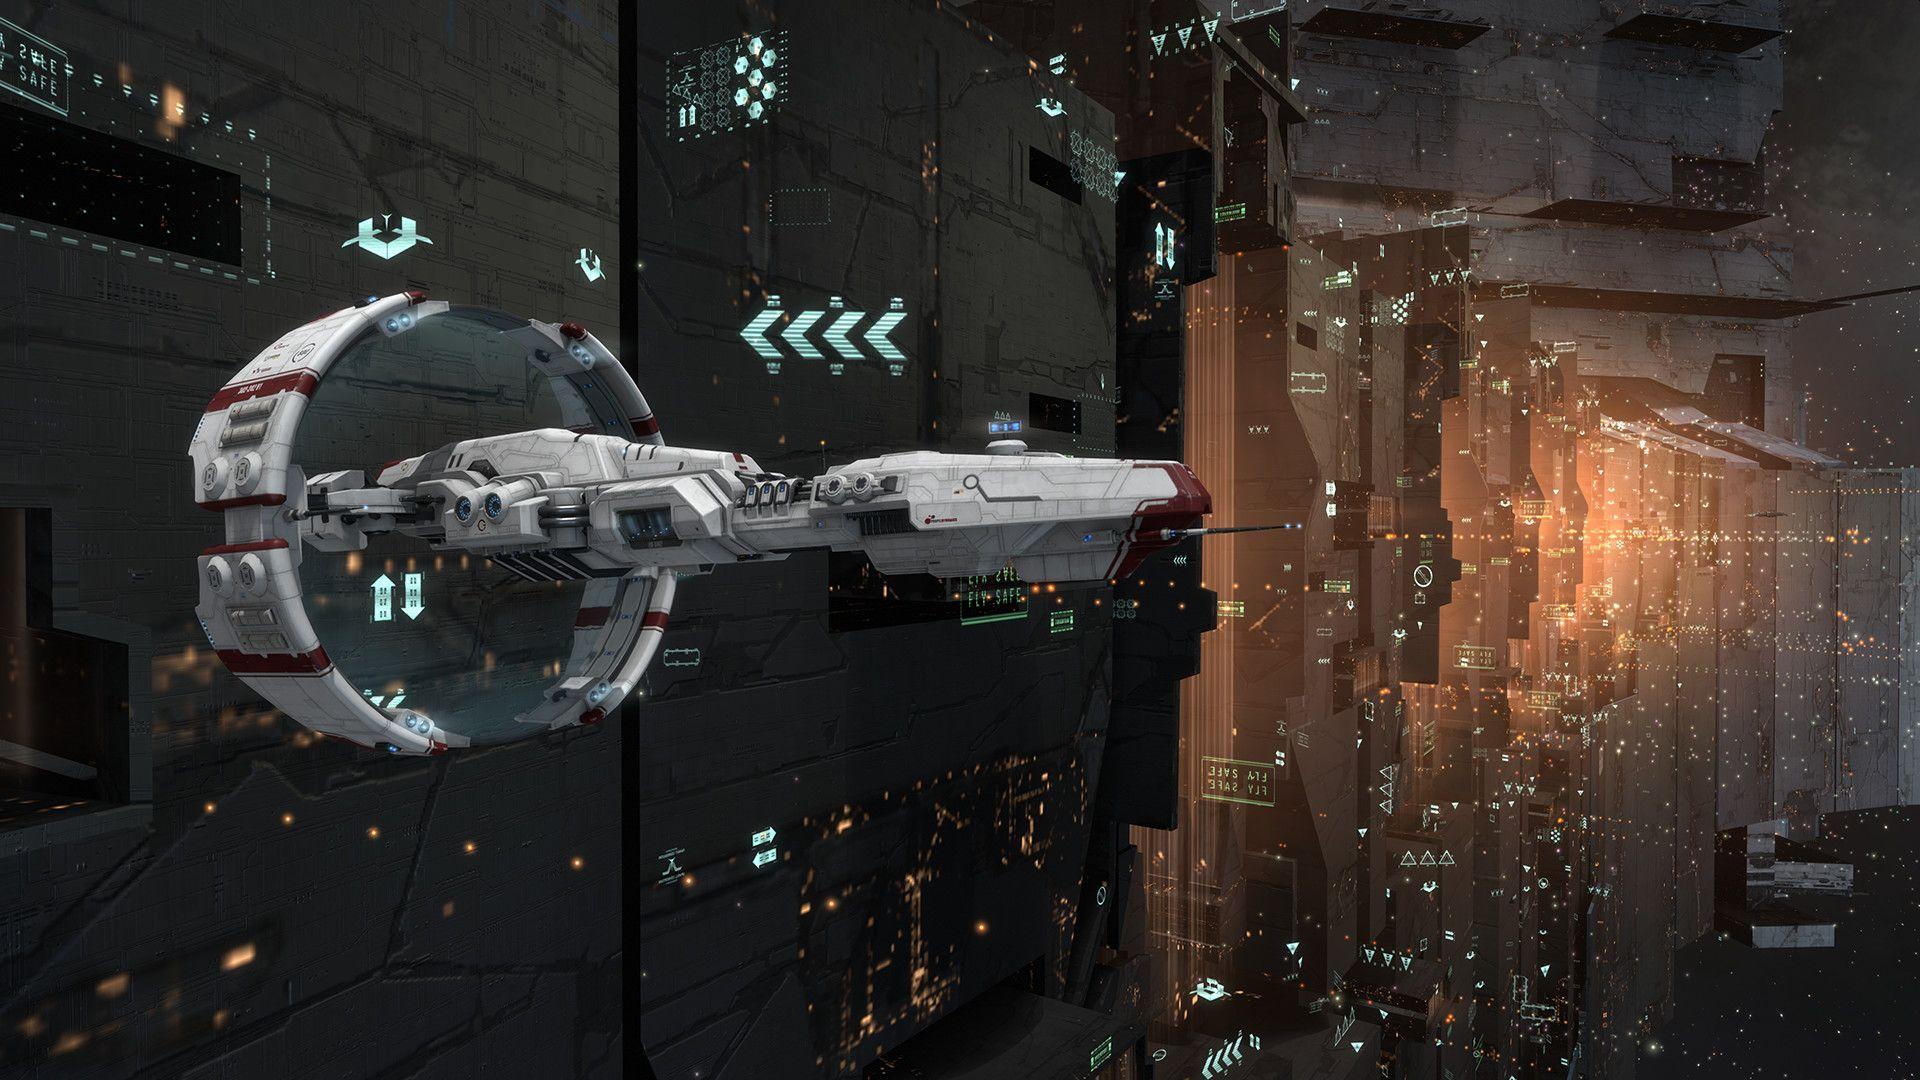 Best space games: EVE Online. Image shows a spaceship flying near a large space station.